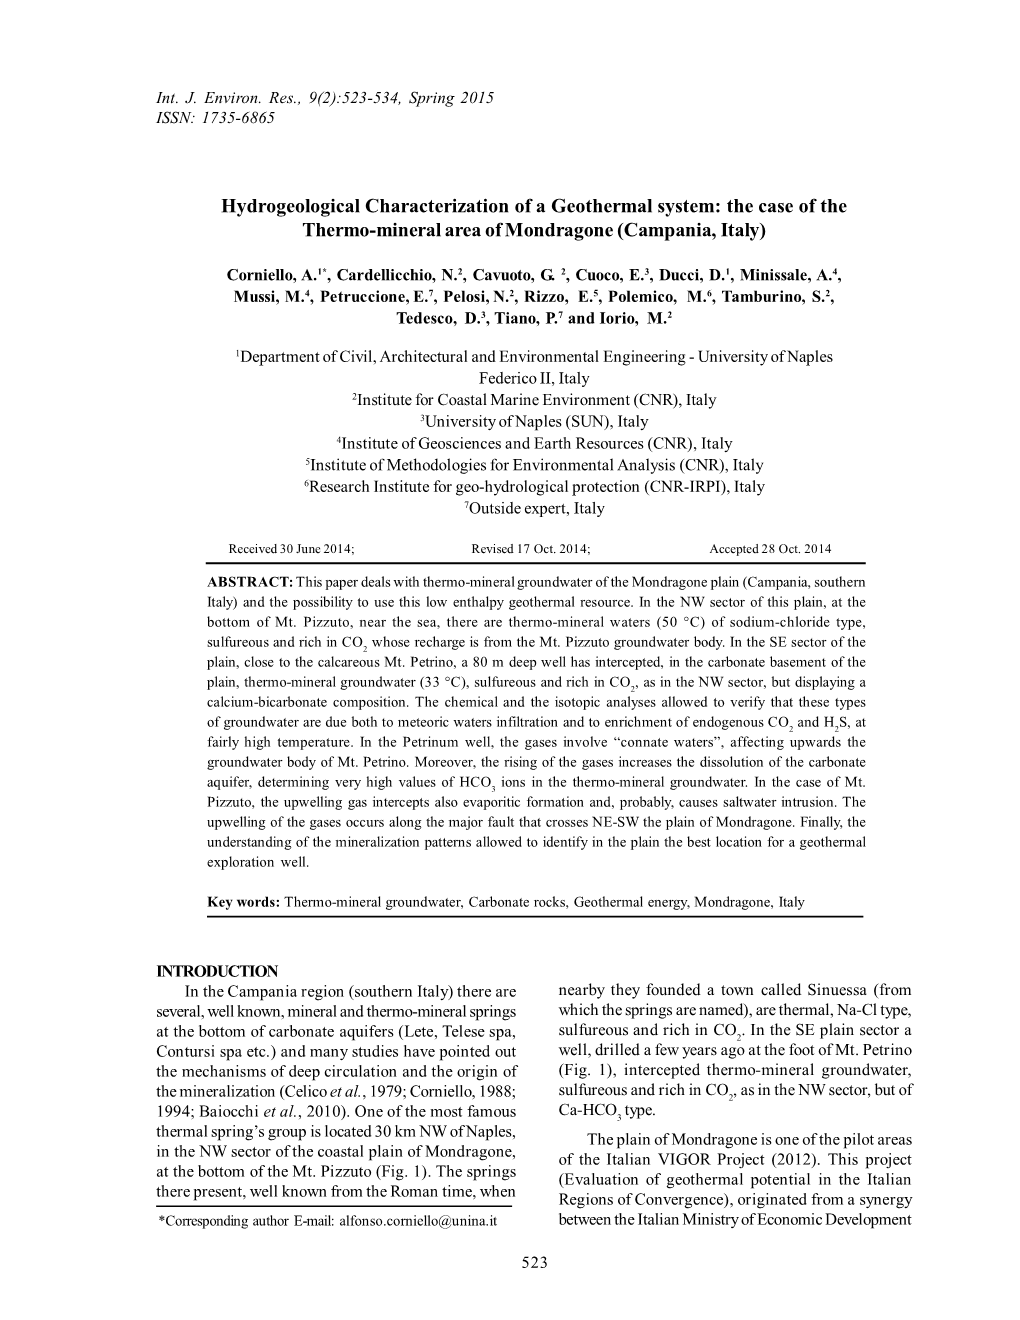 Hydrogeological Characterization of a Geothermal System: the Case of the Thermo-Mineral Area of Mondragone (Campania, Italy)